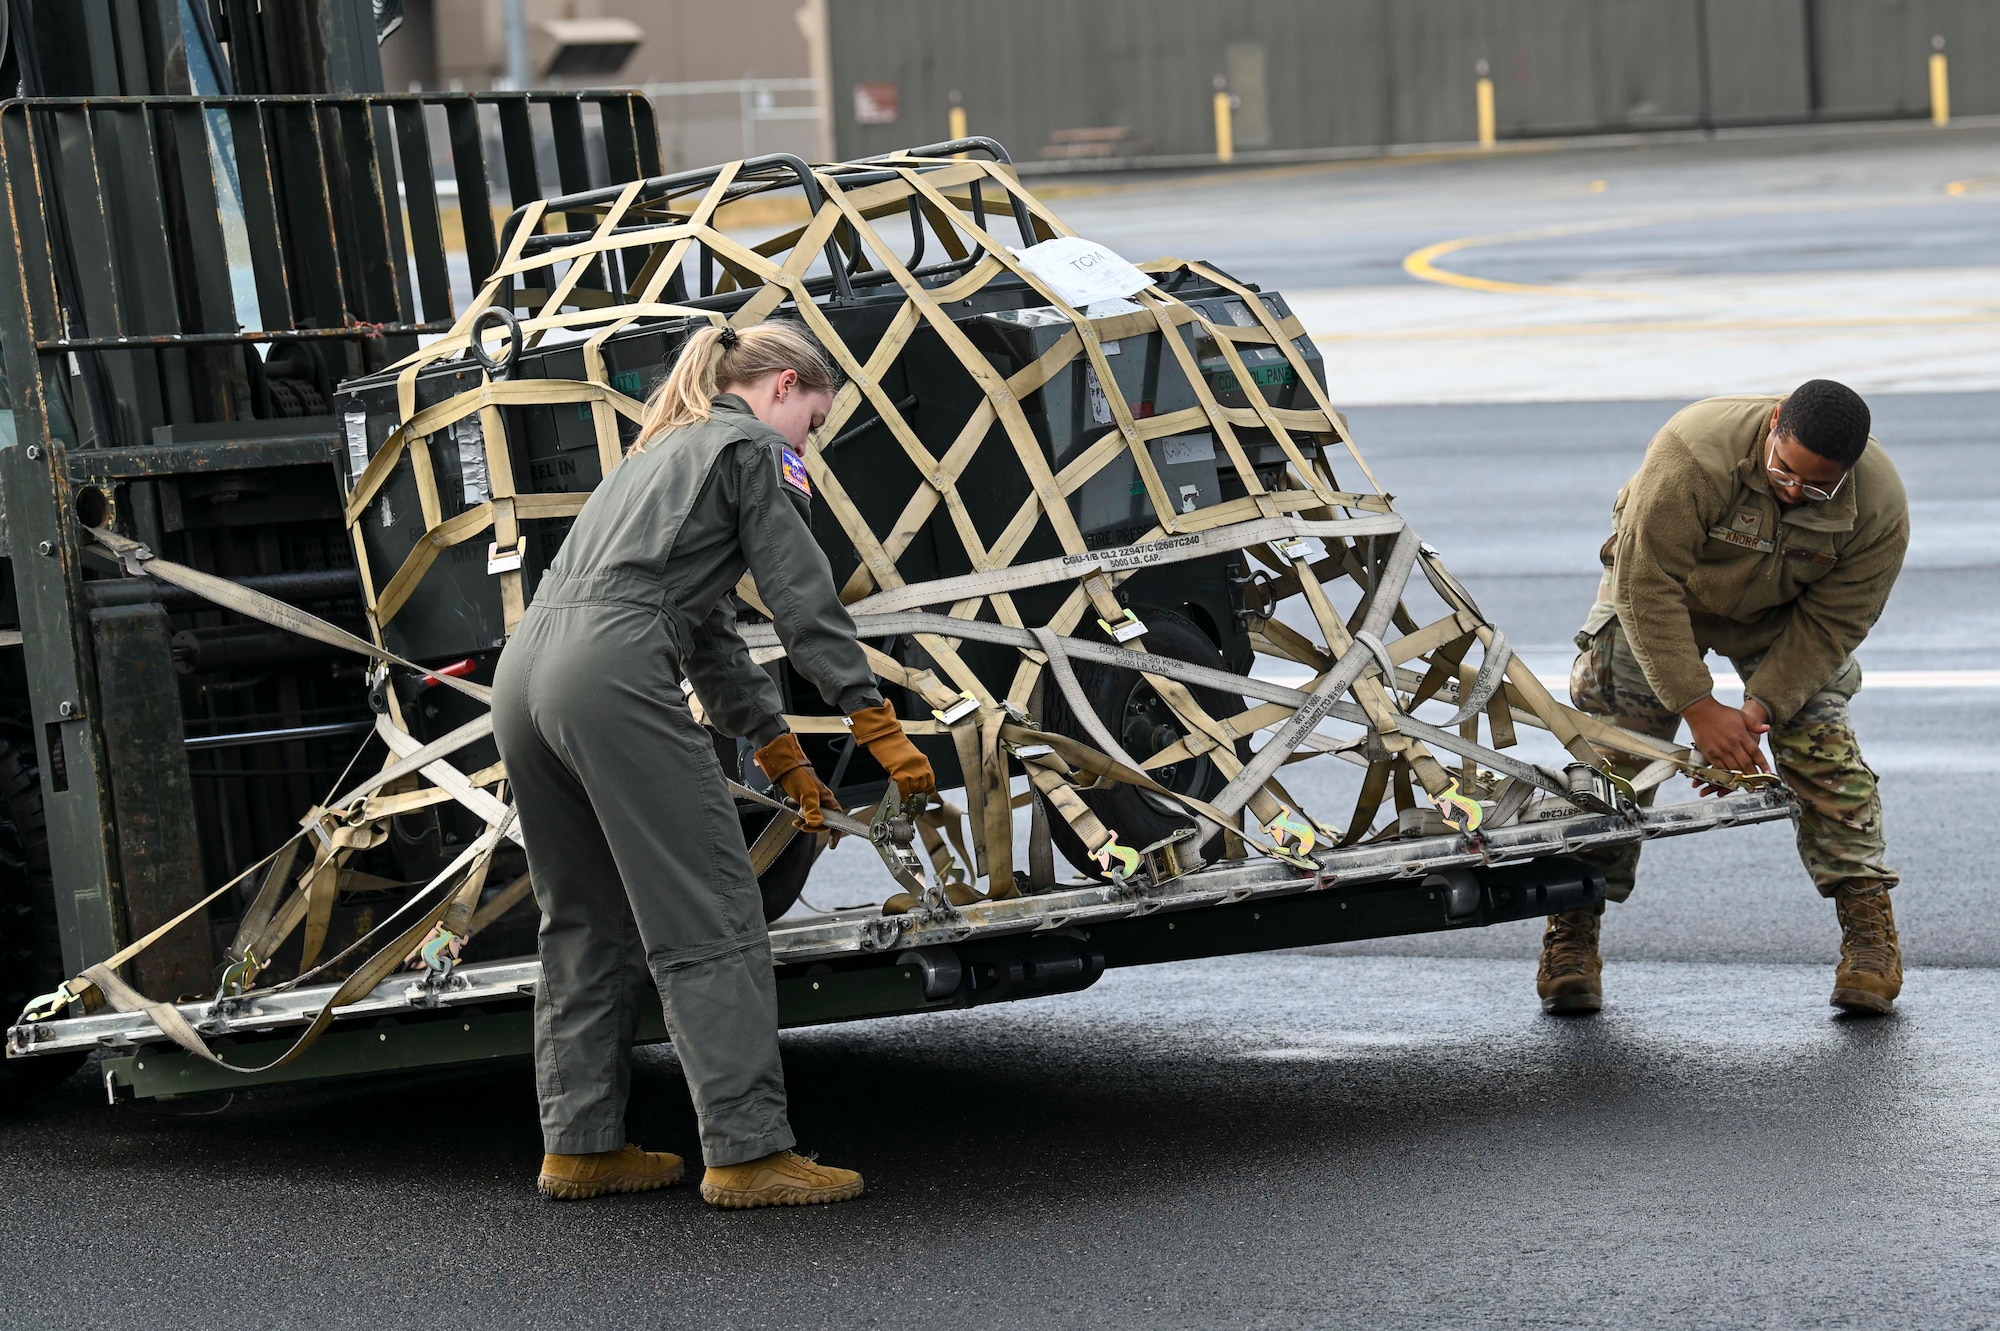 Two Airmen adjust a net that is on top of cargo holding it in place on the pallet of the forklift